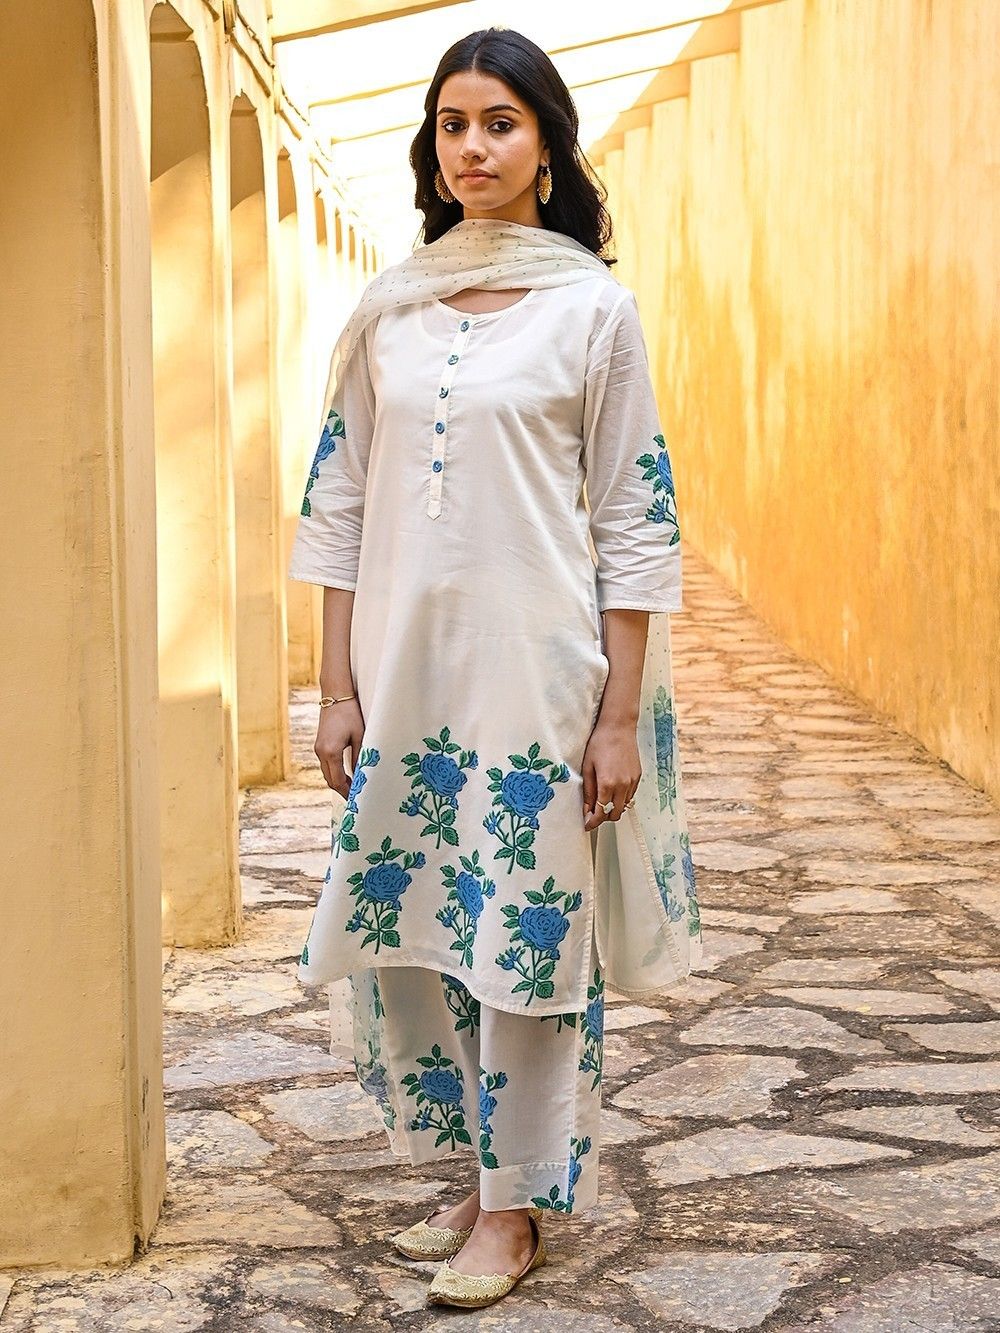 Details more than 147 white kurti and jeans